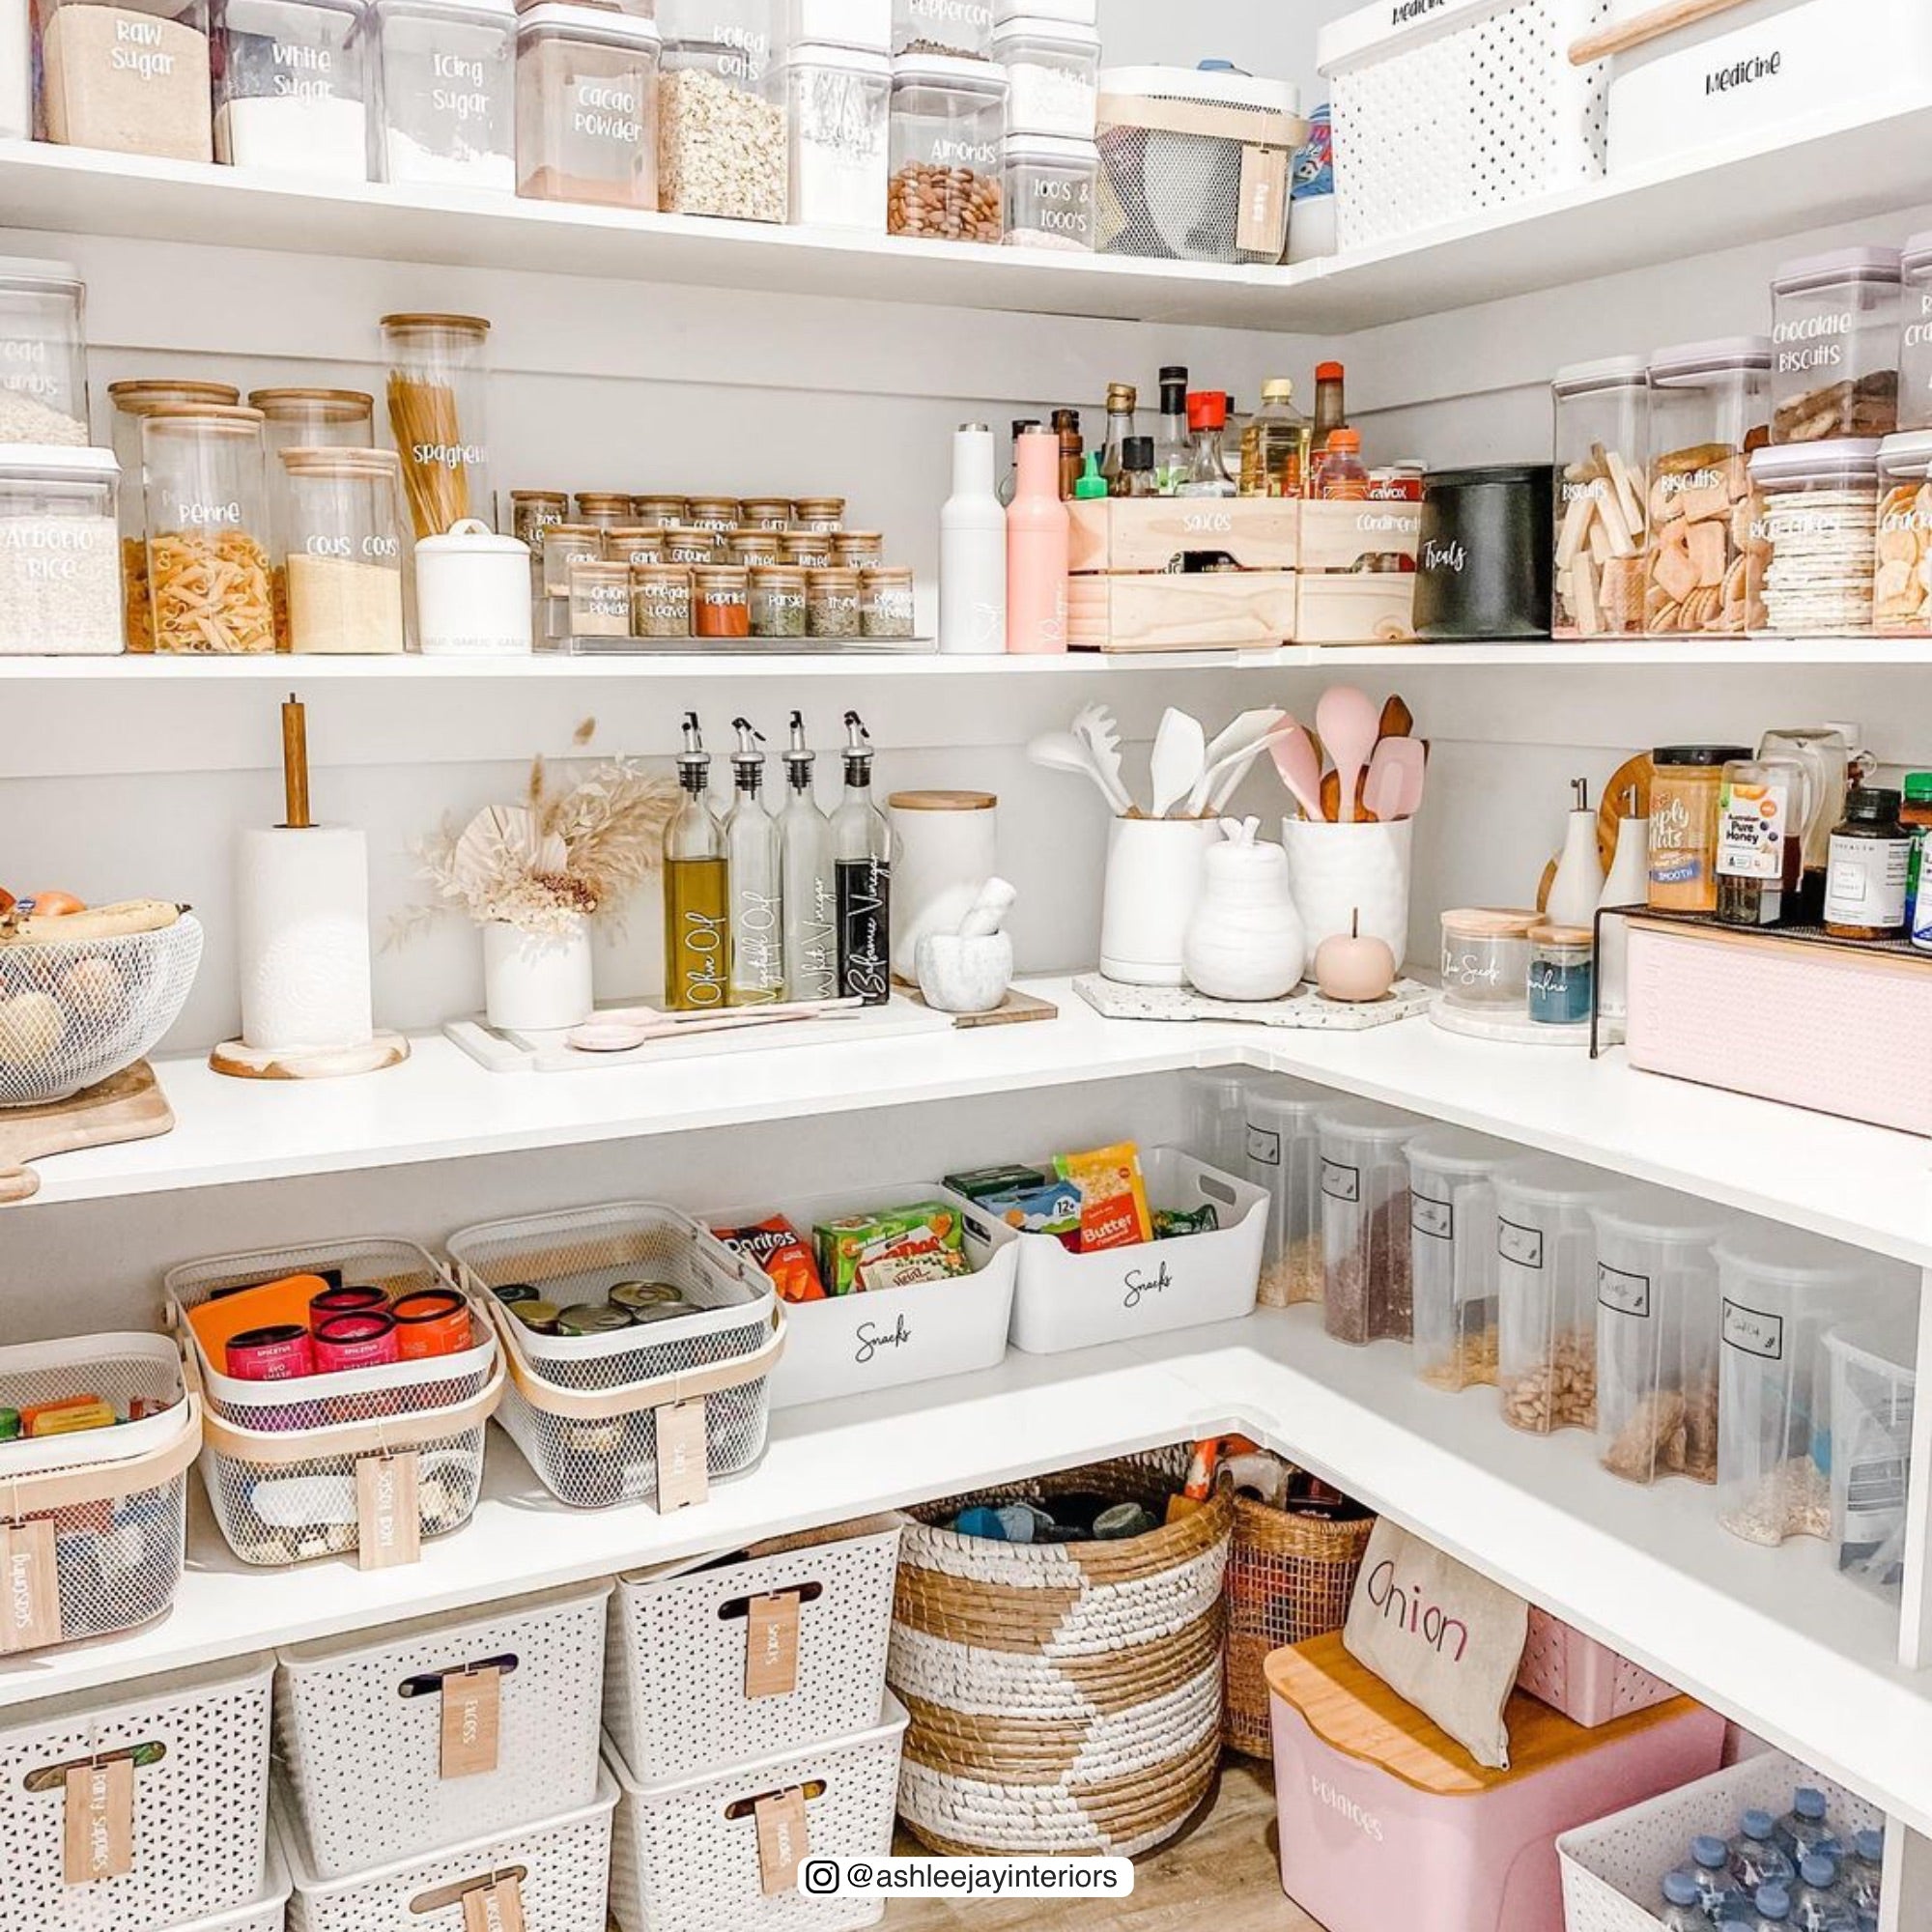 Organised pantry using containers